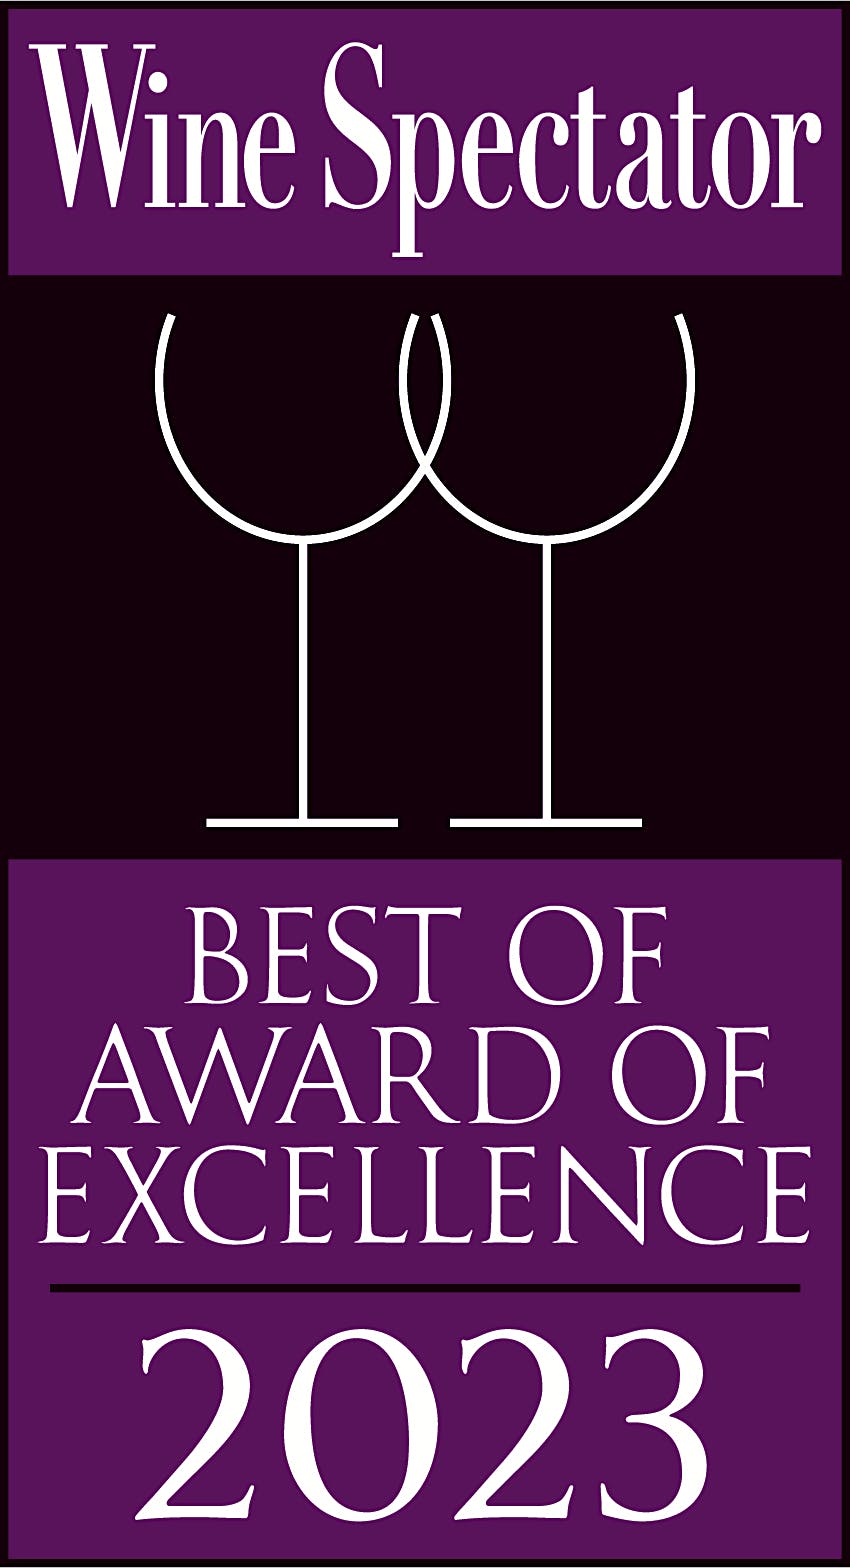 Wine Spectator - Best of Award of Excellence 2023